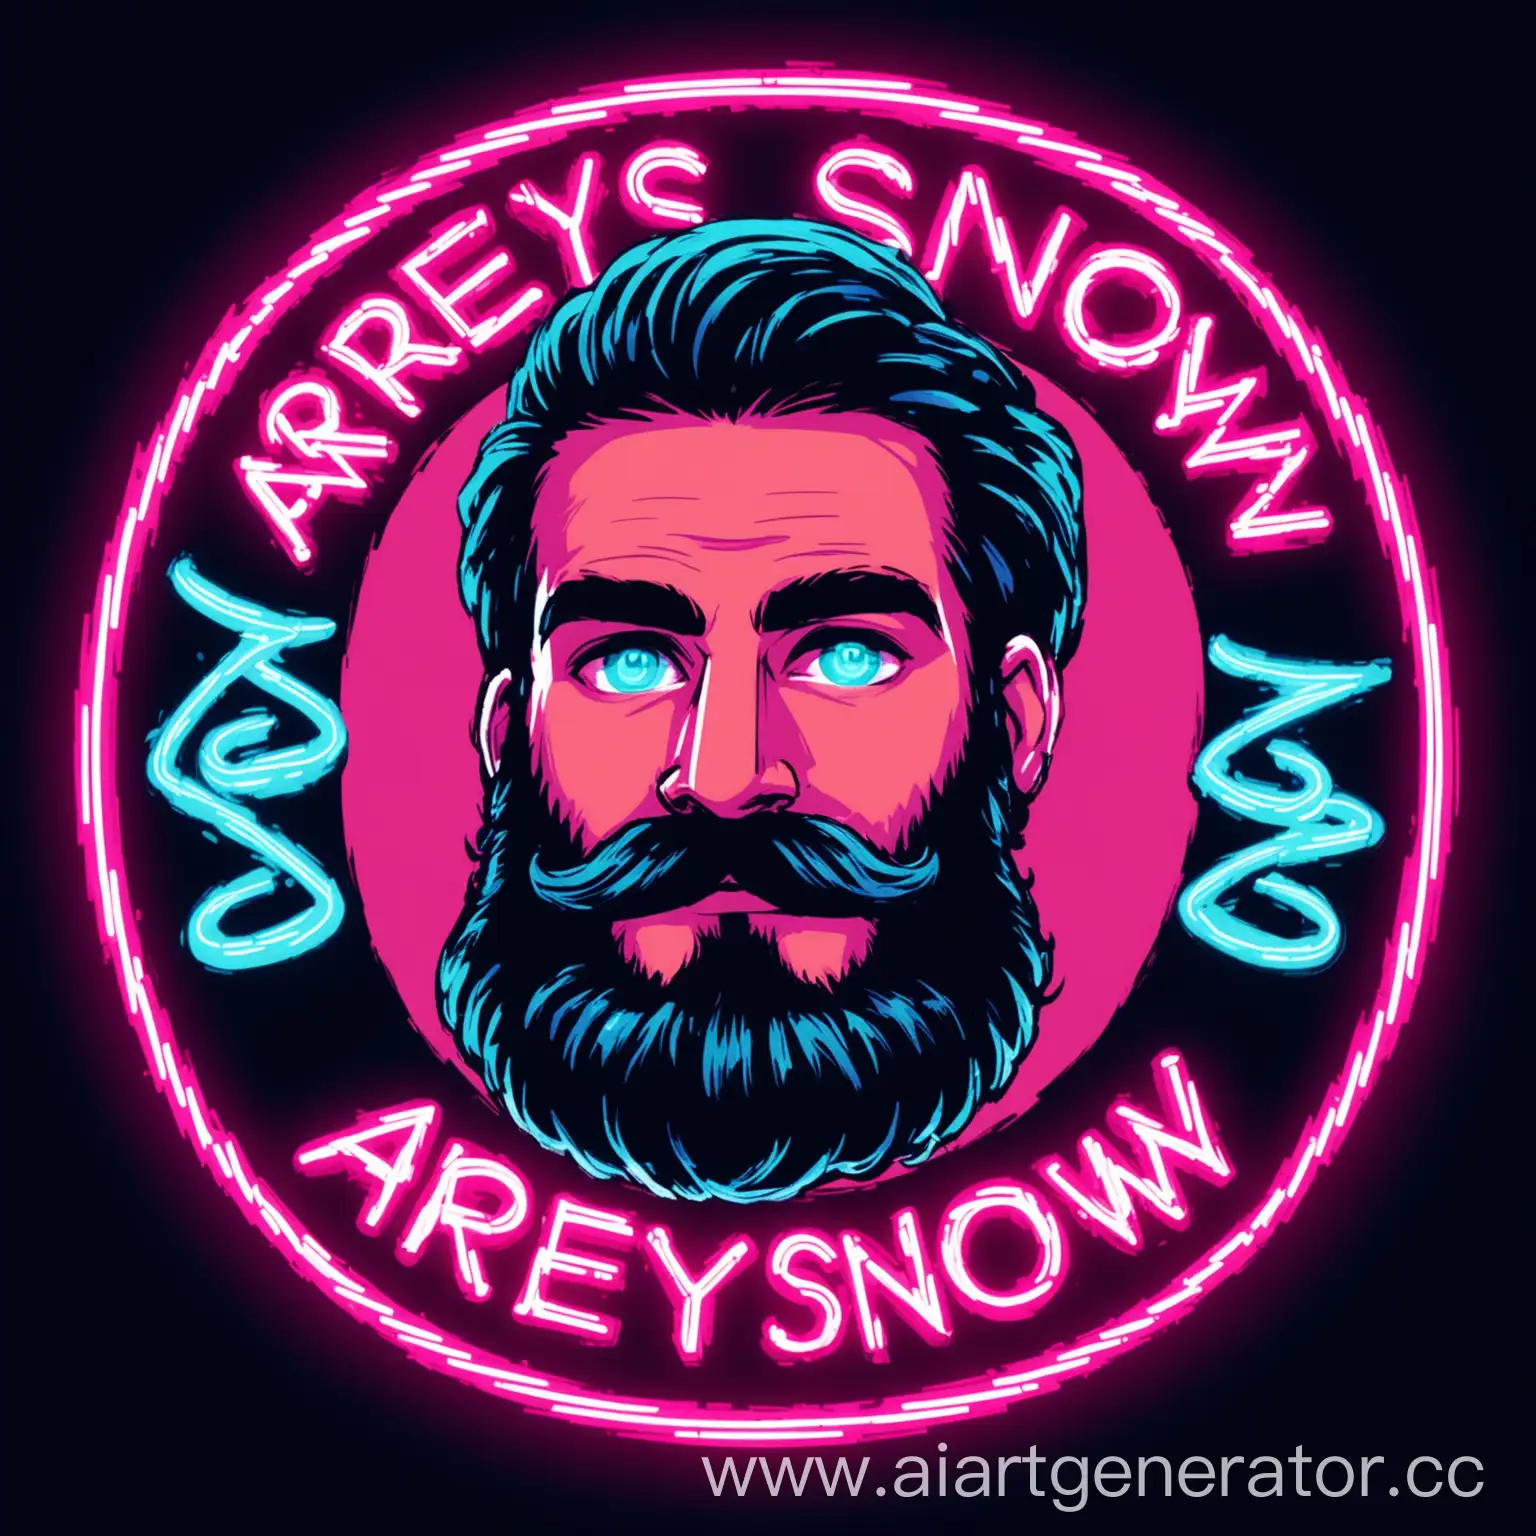 Neon-Round-Logo-with-Young-Bearded-Man-and-AreySnow-Inscription